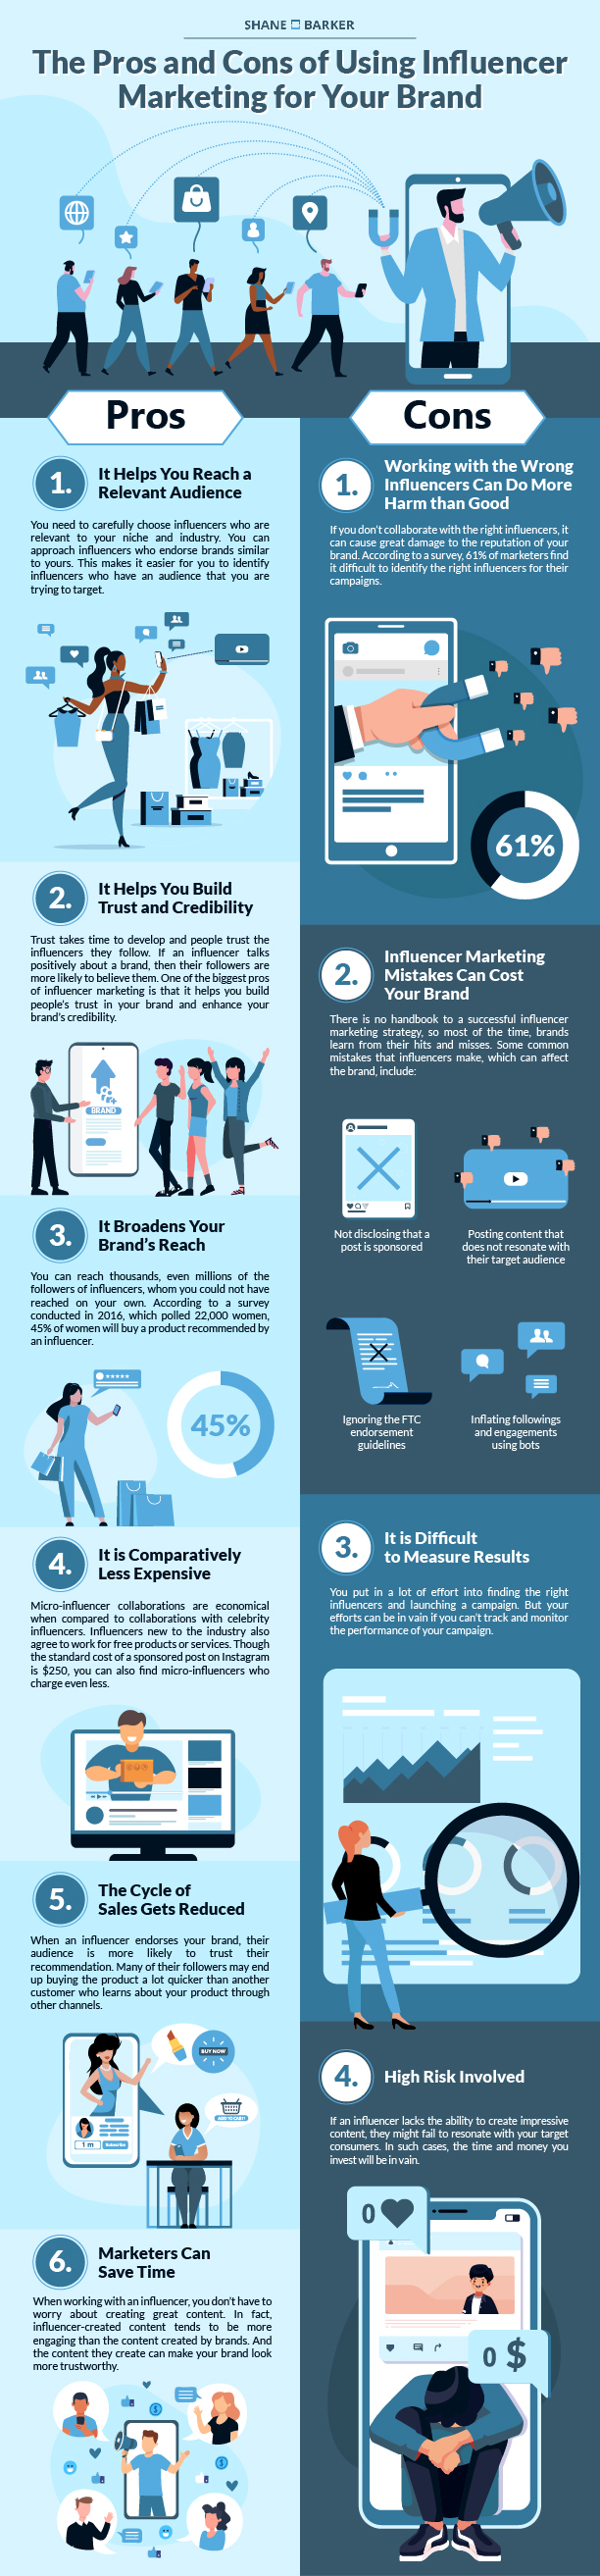 The Pros & Cons of Influencer Marketing - Infographic